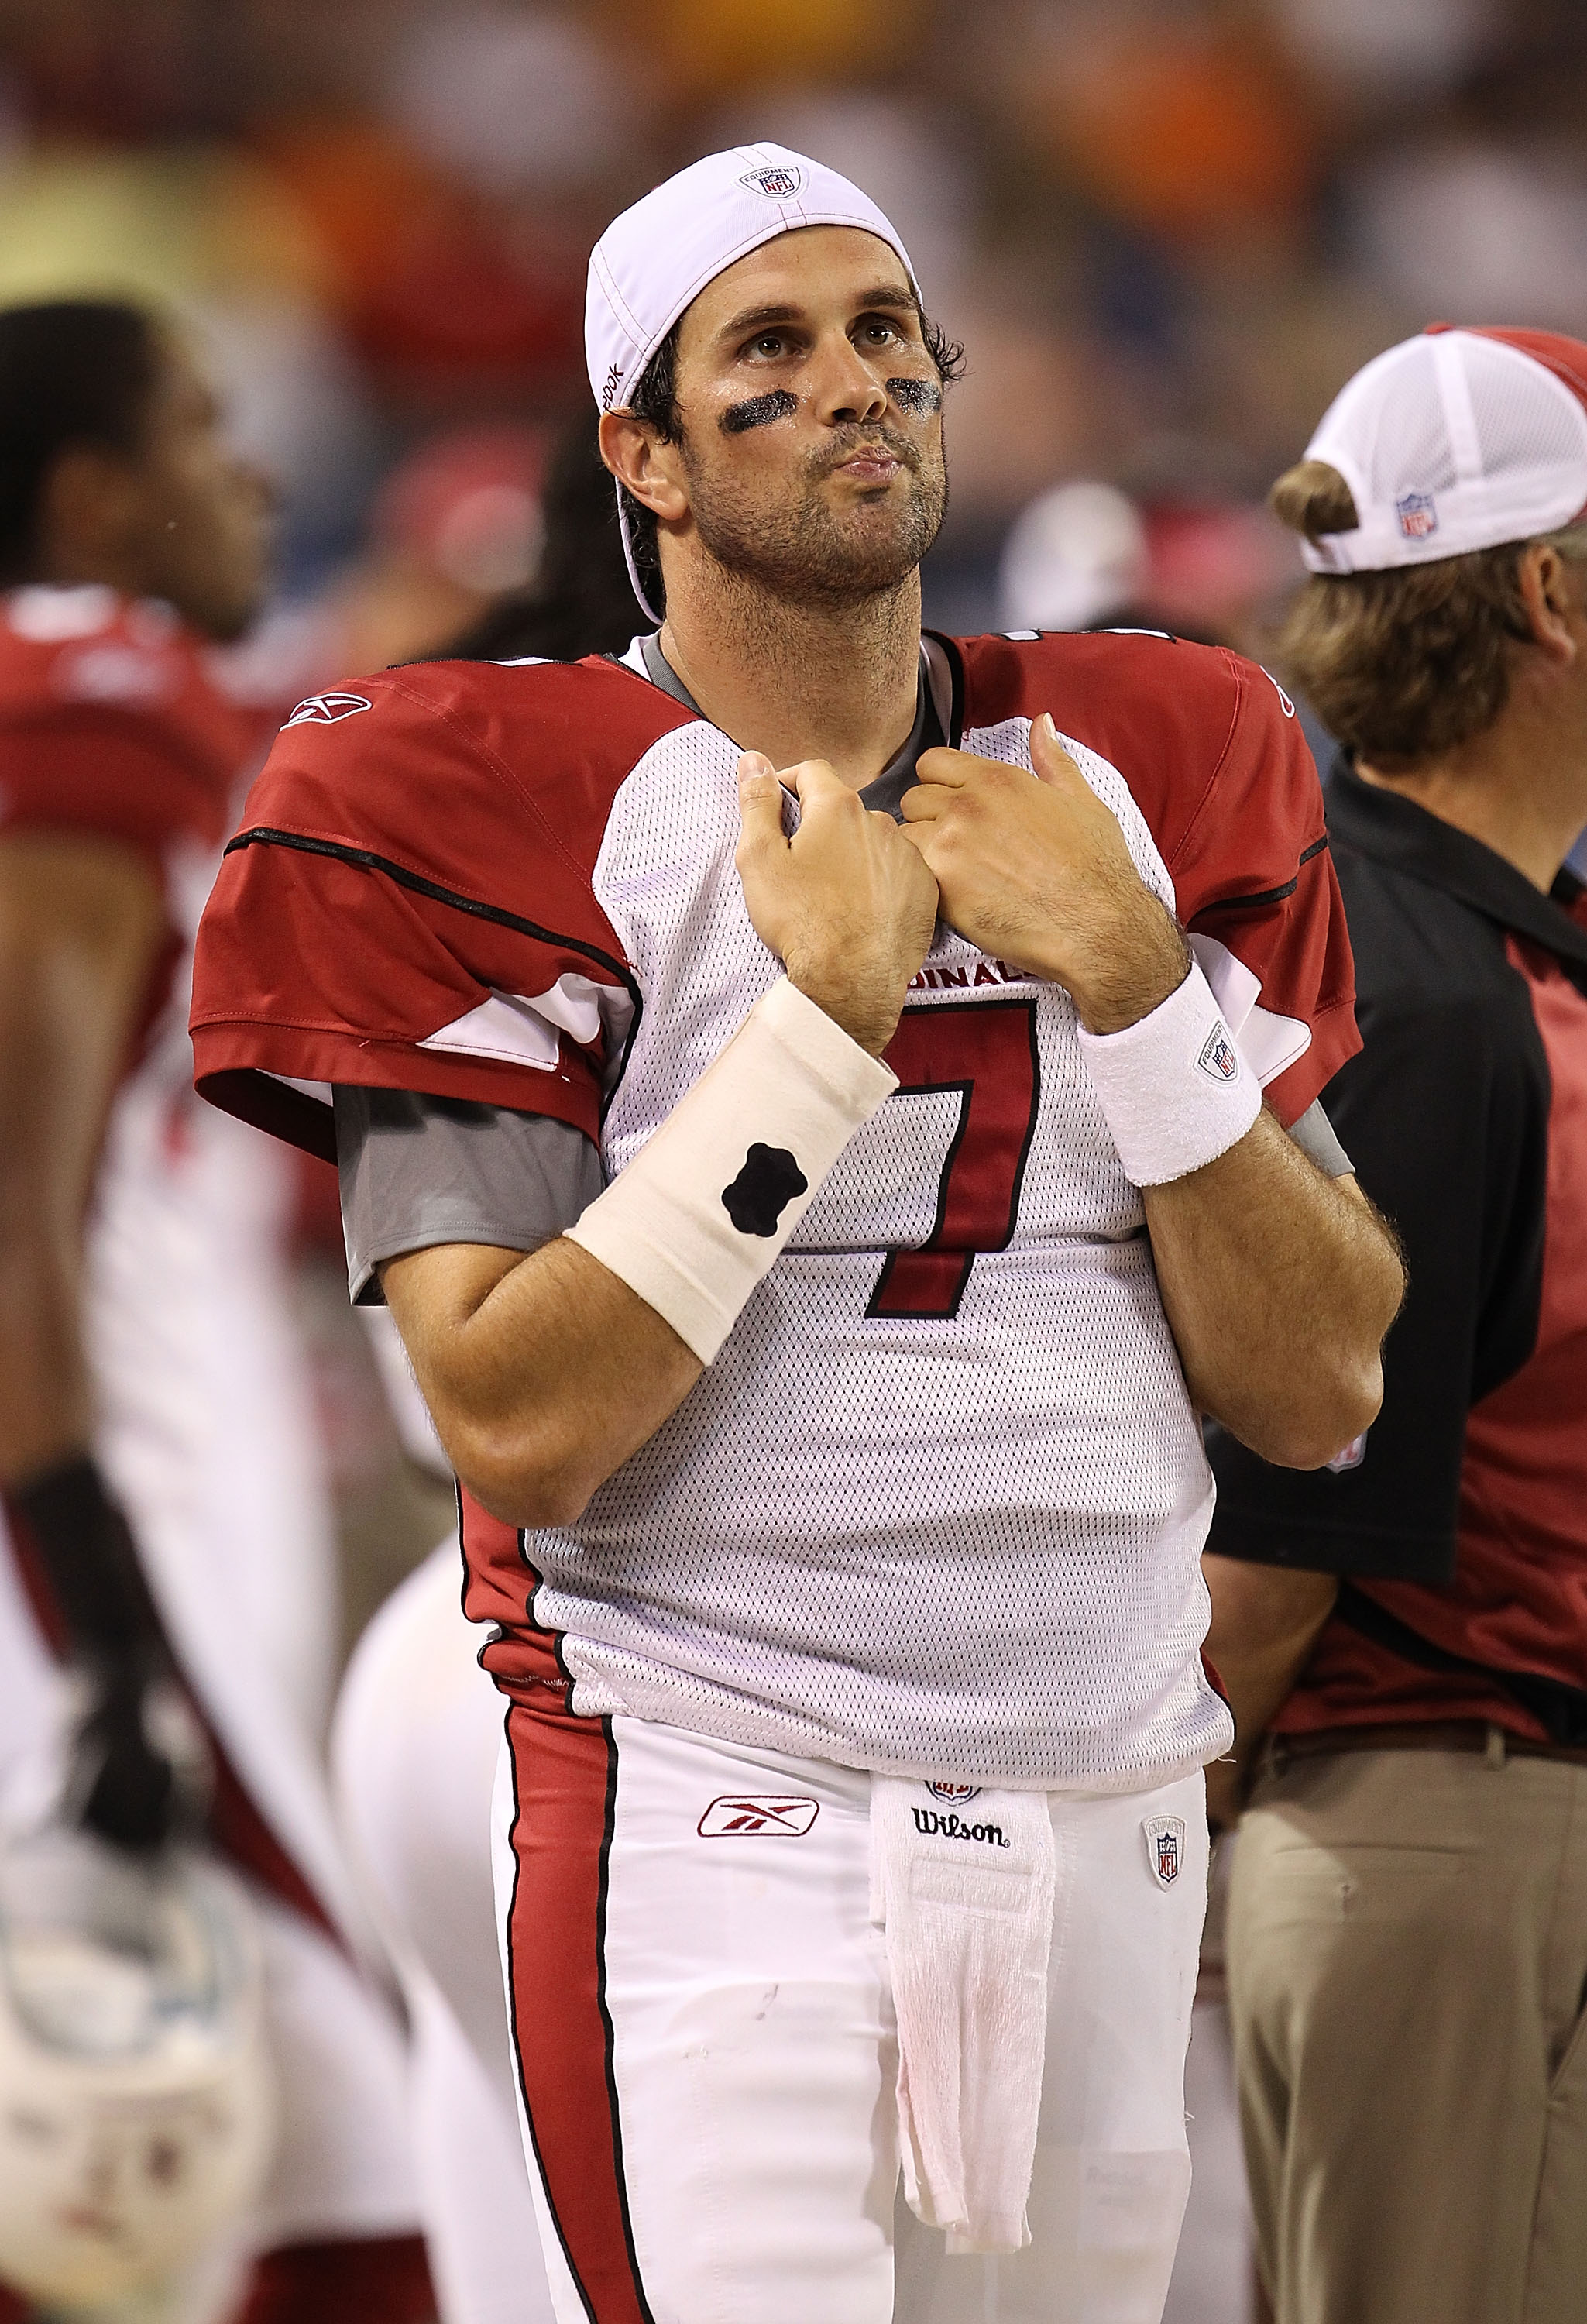 CHICAGO - AUGUST 28: Matt Leinart #7 of the Arizona Cardinals walks in the bench area during a preseason game against the Chicago Bears at Soldier Field on August 28, 2010 in Chicago, Illinois. The Cardinals defeated the Bears 14-9. (Photo by Jonathan Dan